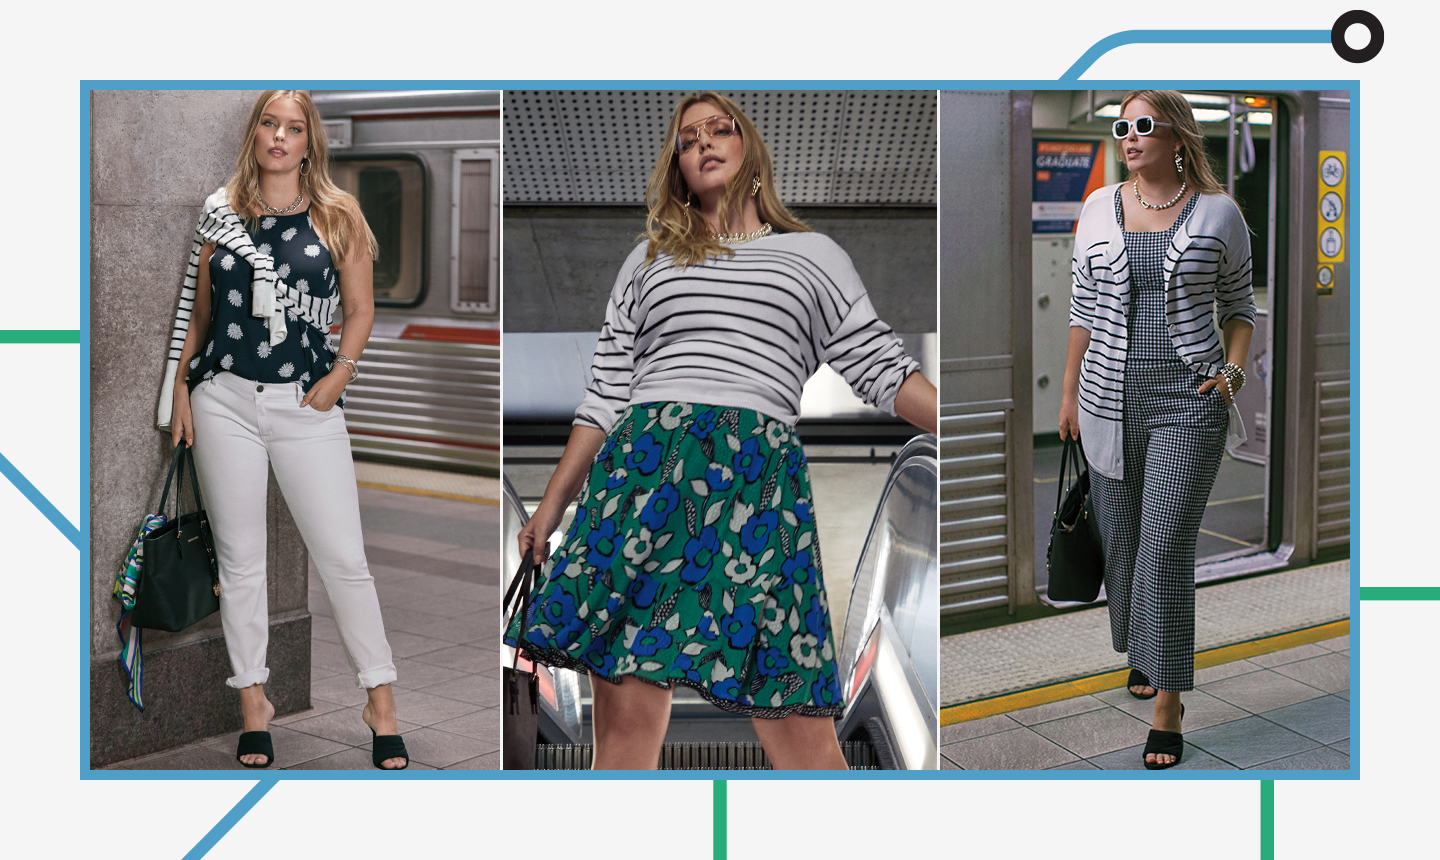 ticket to ride: a capsule wardrobe for all occasions